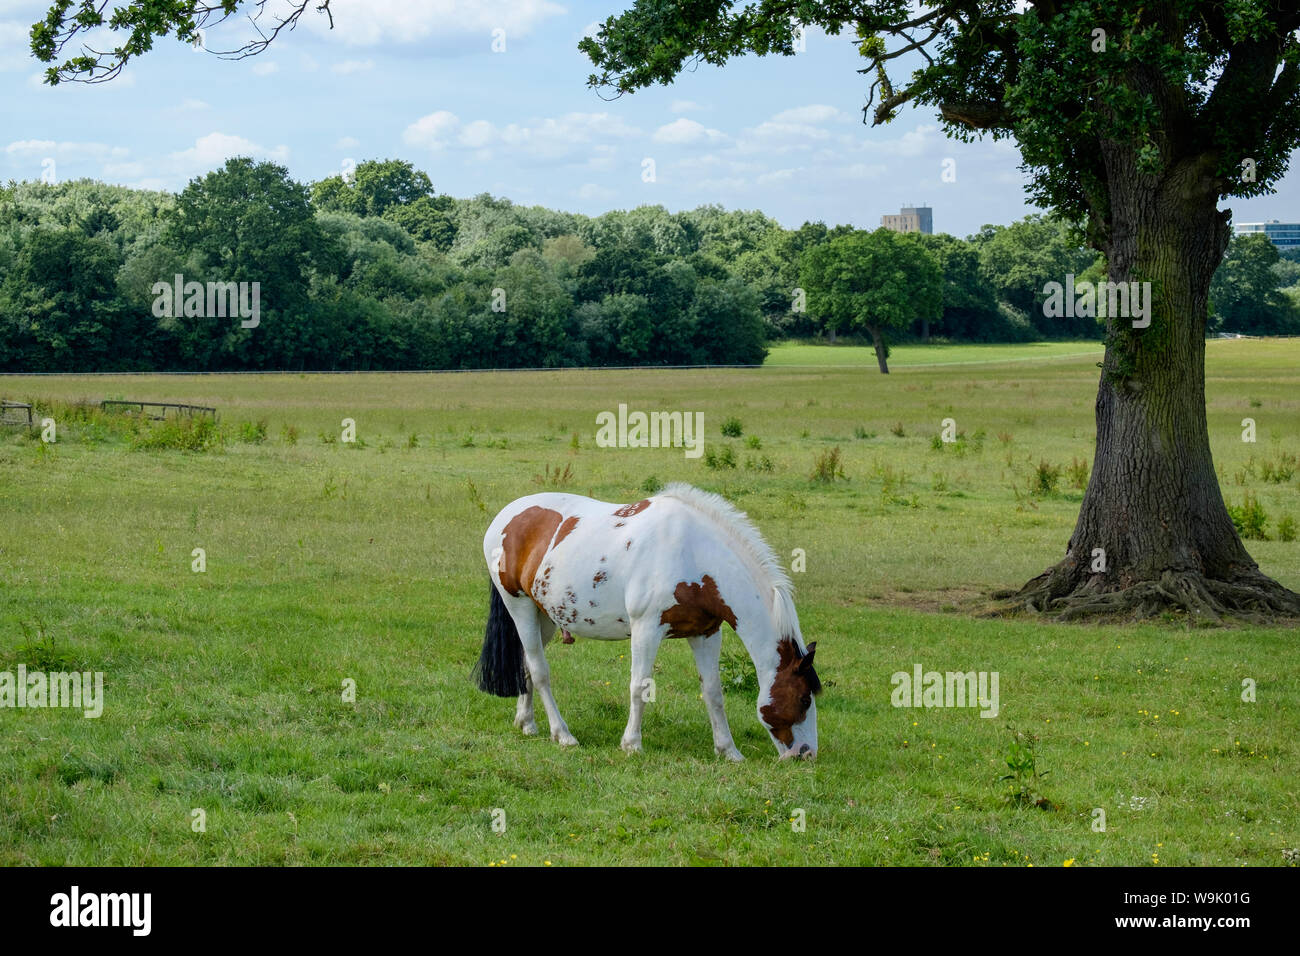 A brown and white skewbald horse grazes in the green fields at Edwarebury Farm, Edgware, Greater London. Stock Photo